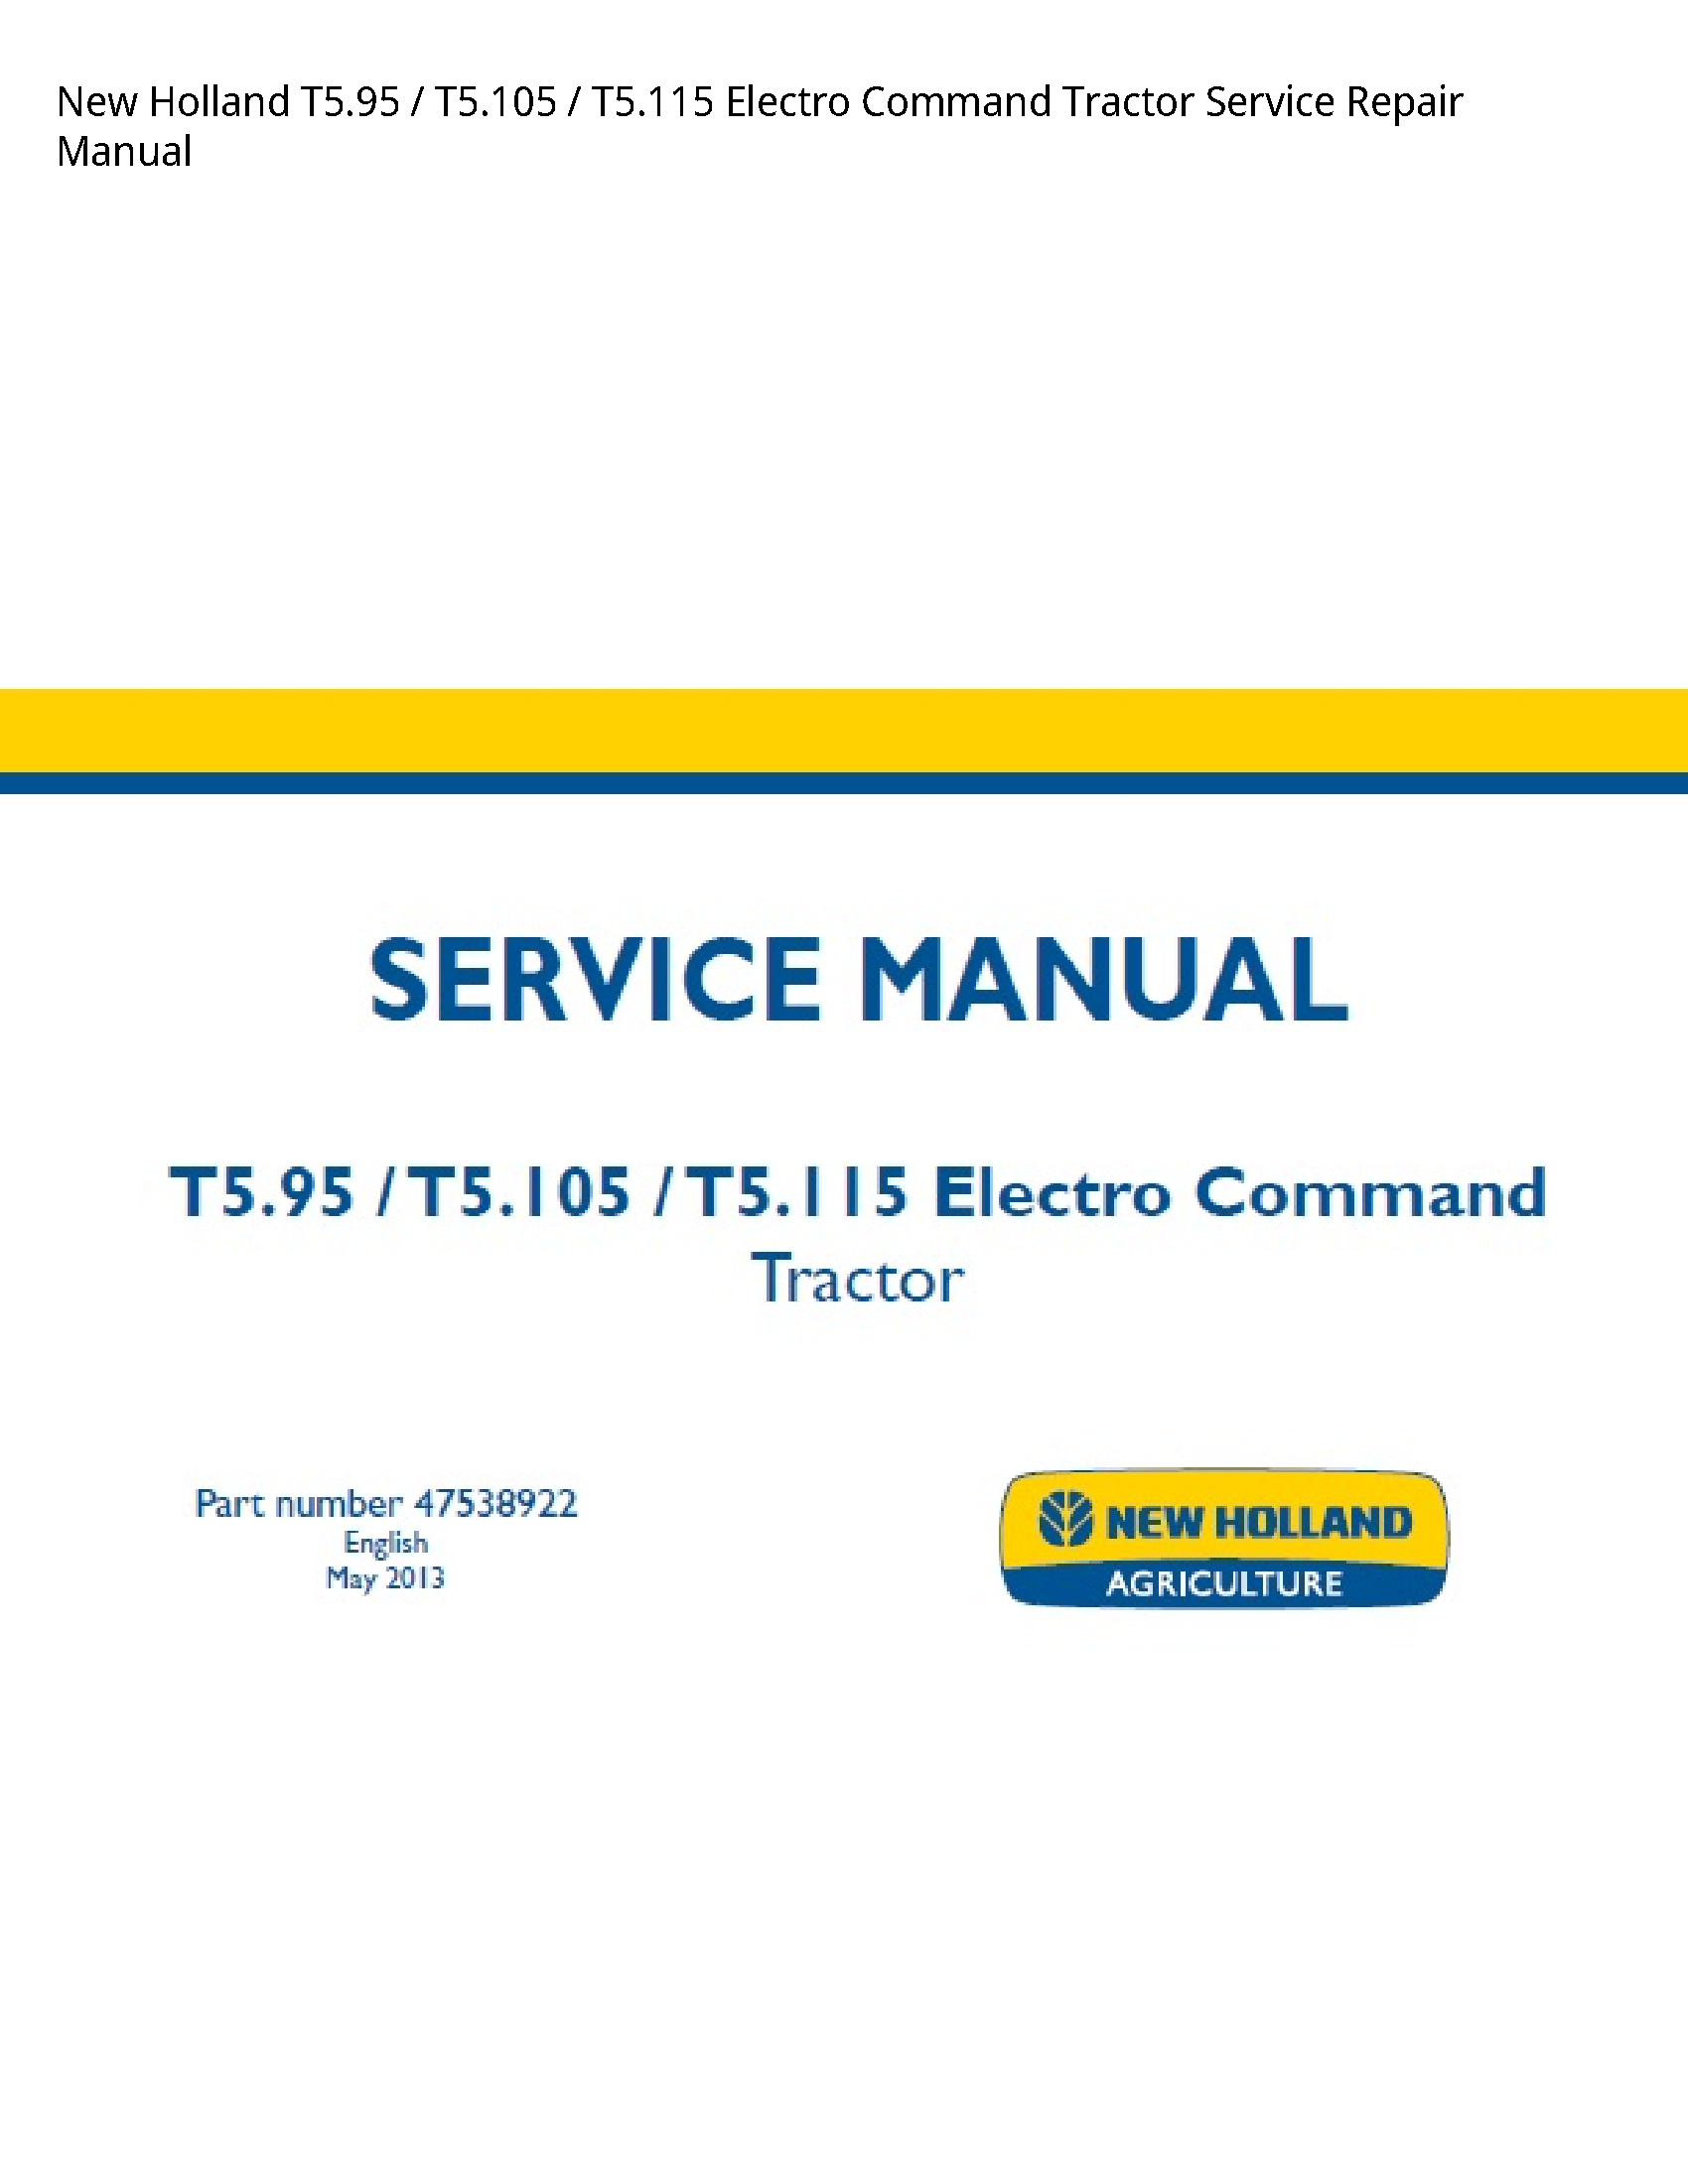 New Holland T5.95 Electro Command Tractor manual